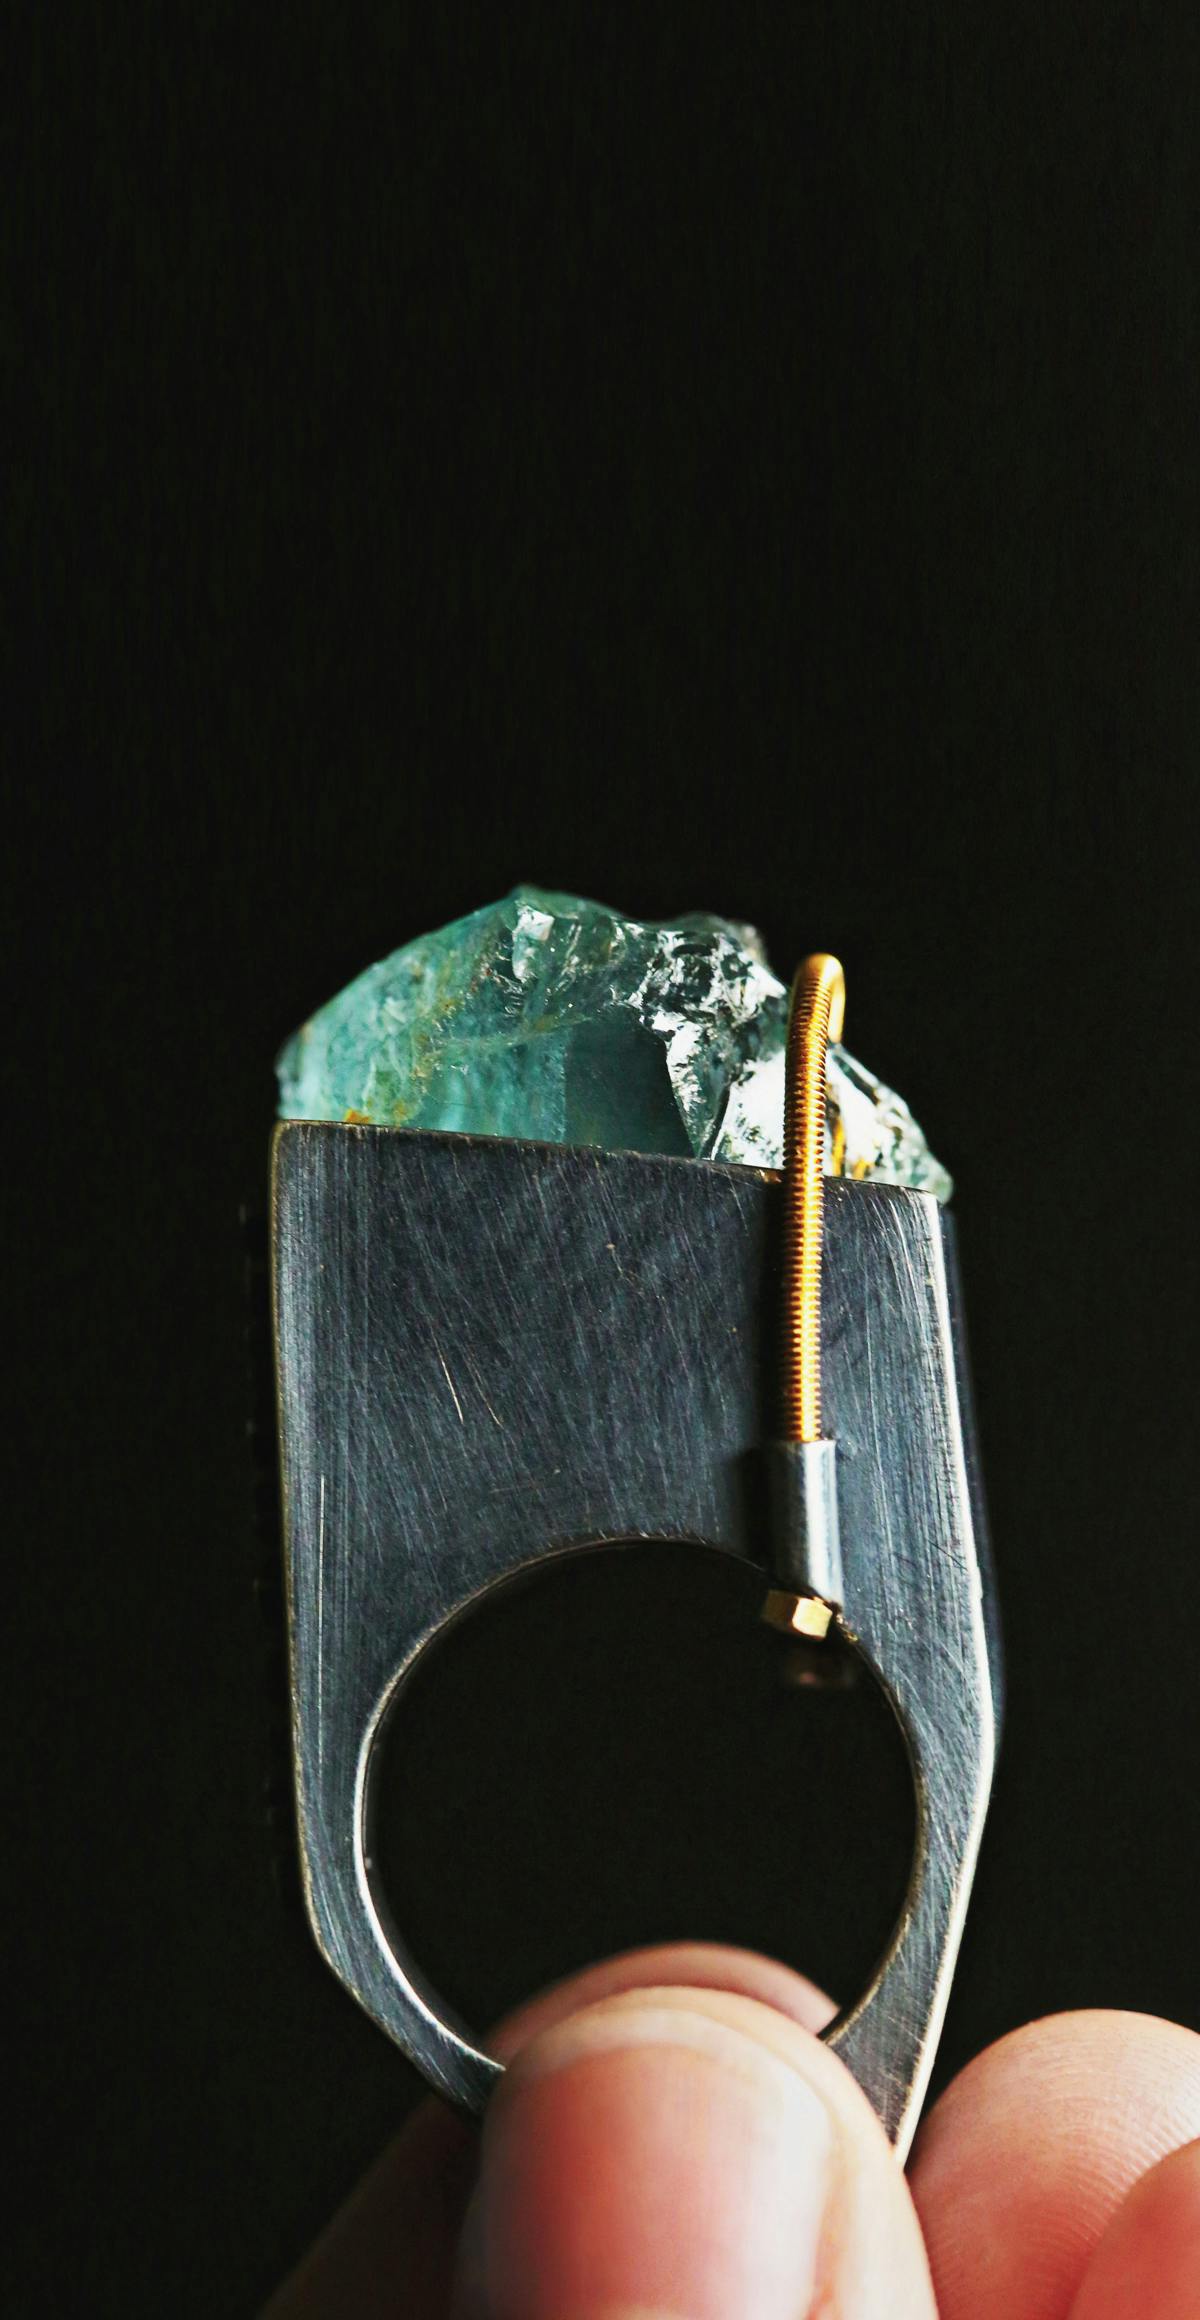 tall metal ring with aquamarine gem and bronze coiled latch